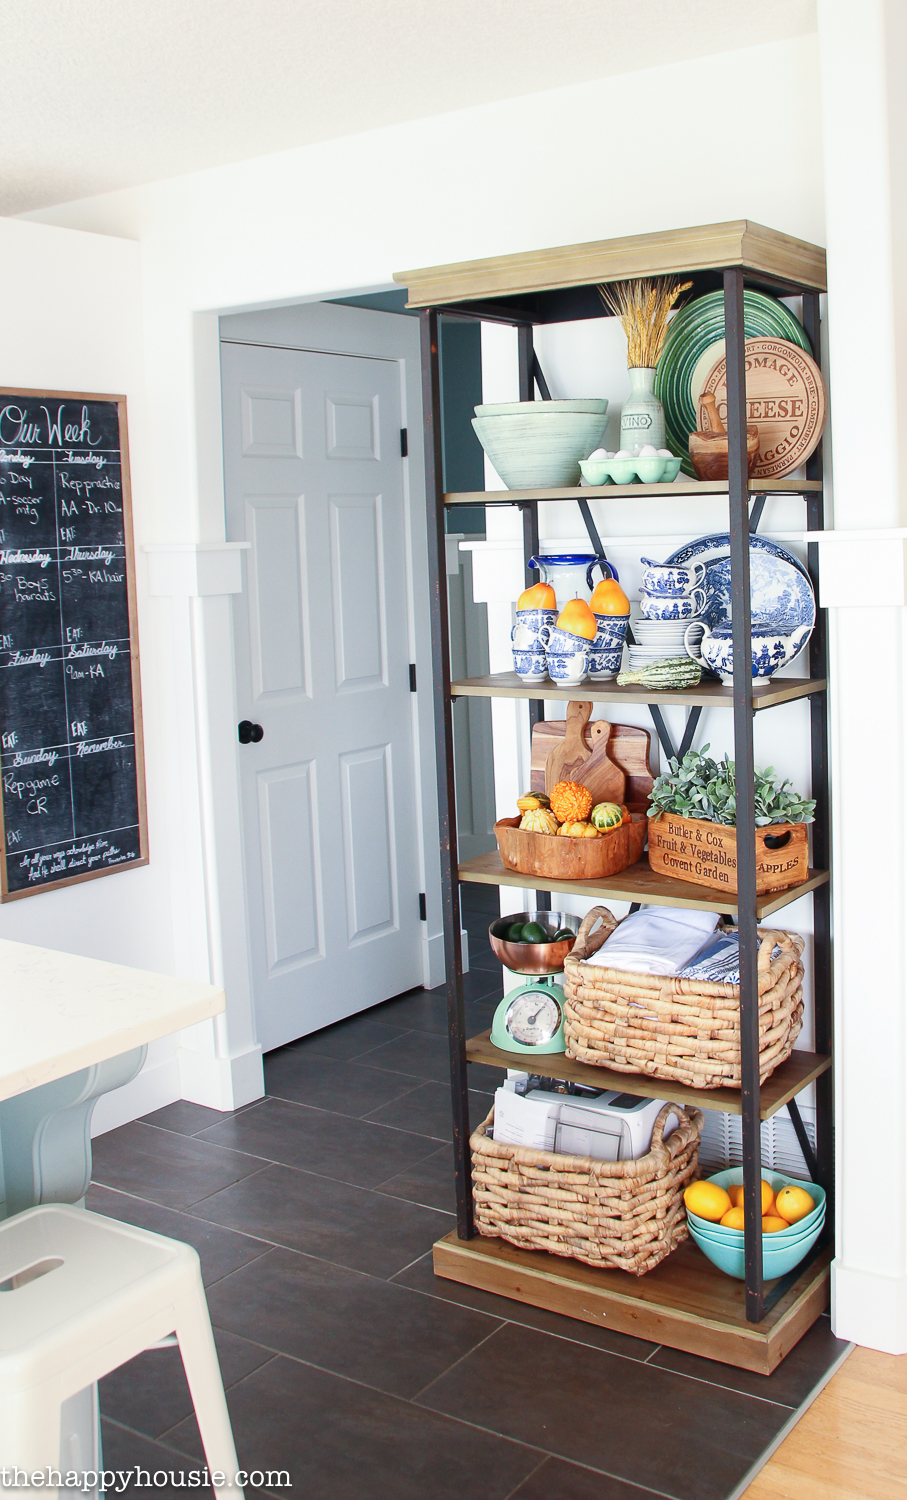 A wood and metal shelving unit in the kitchen contains baskets and plates.